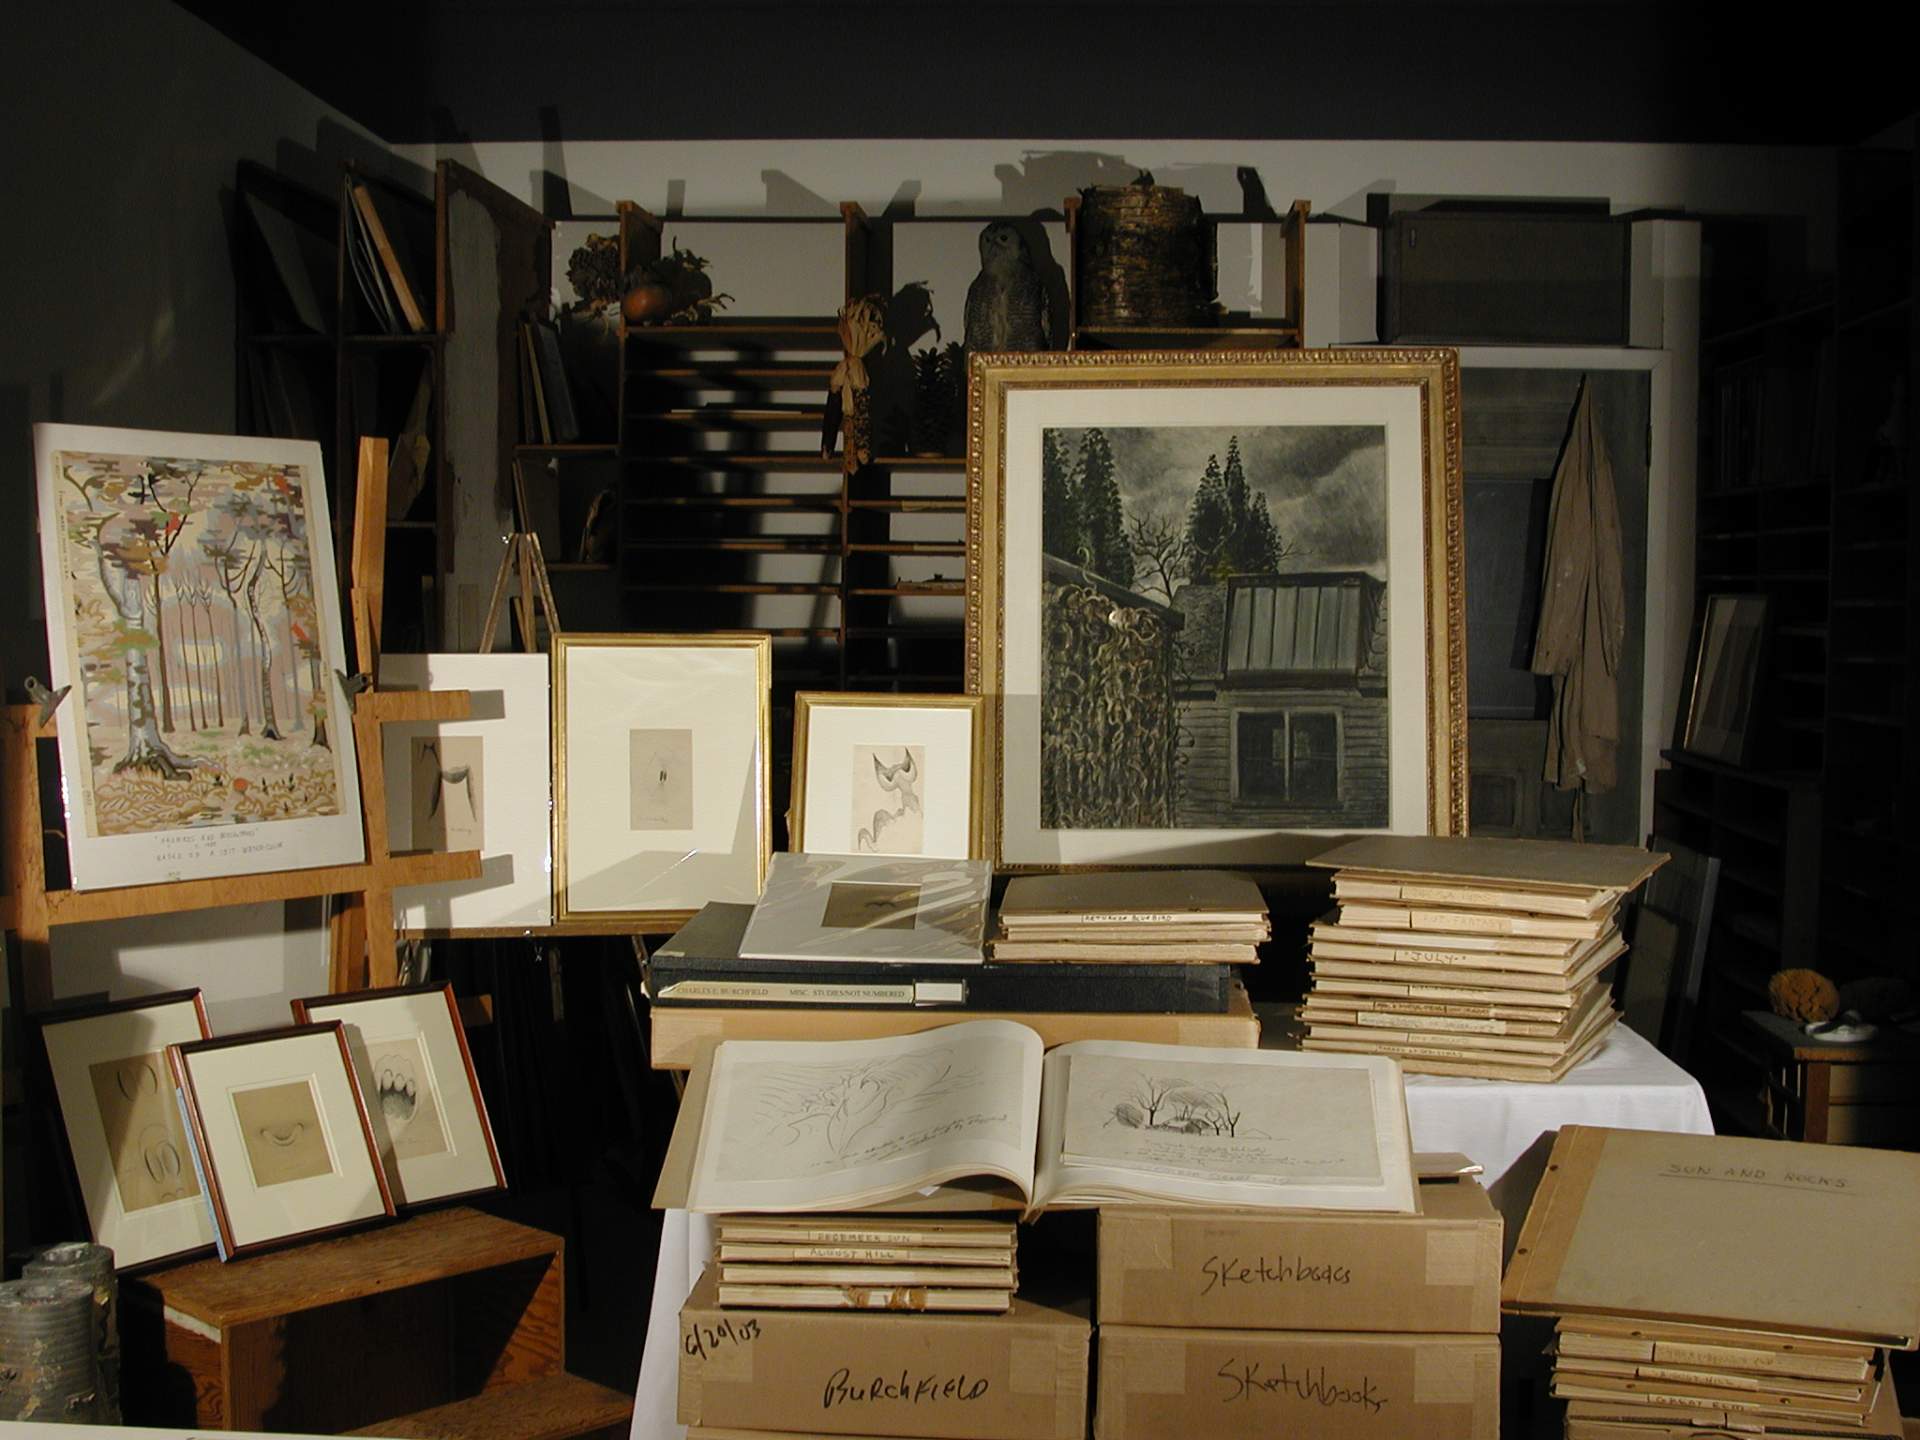 Photograph of Burchfield's sketches and works in the recreated Studio